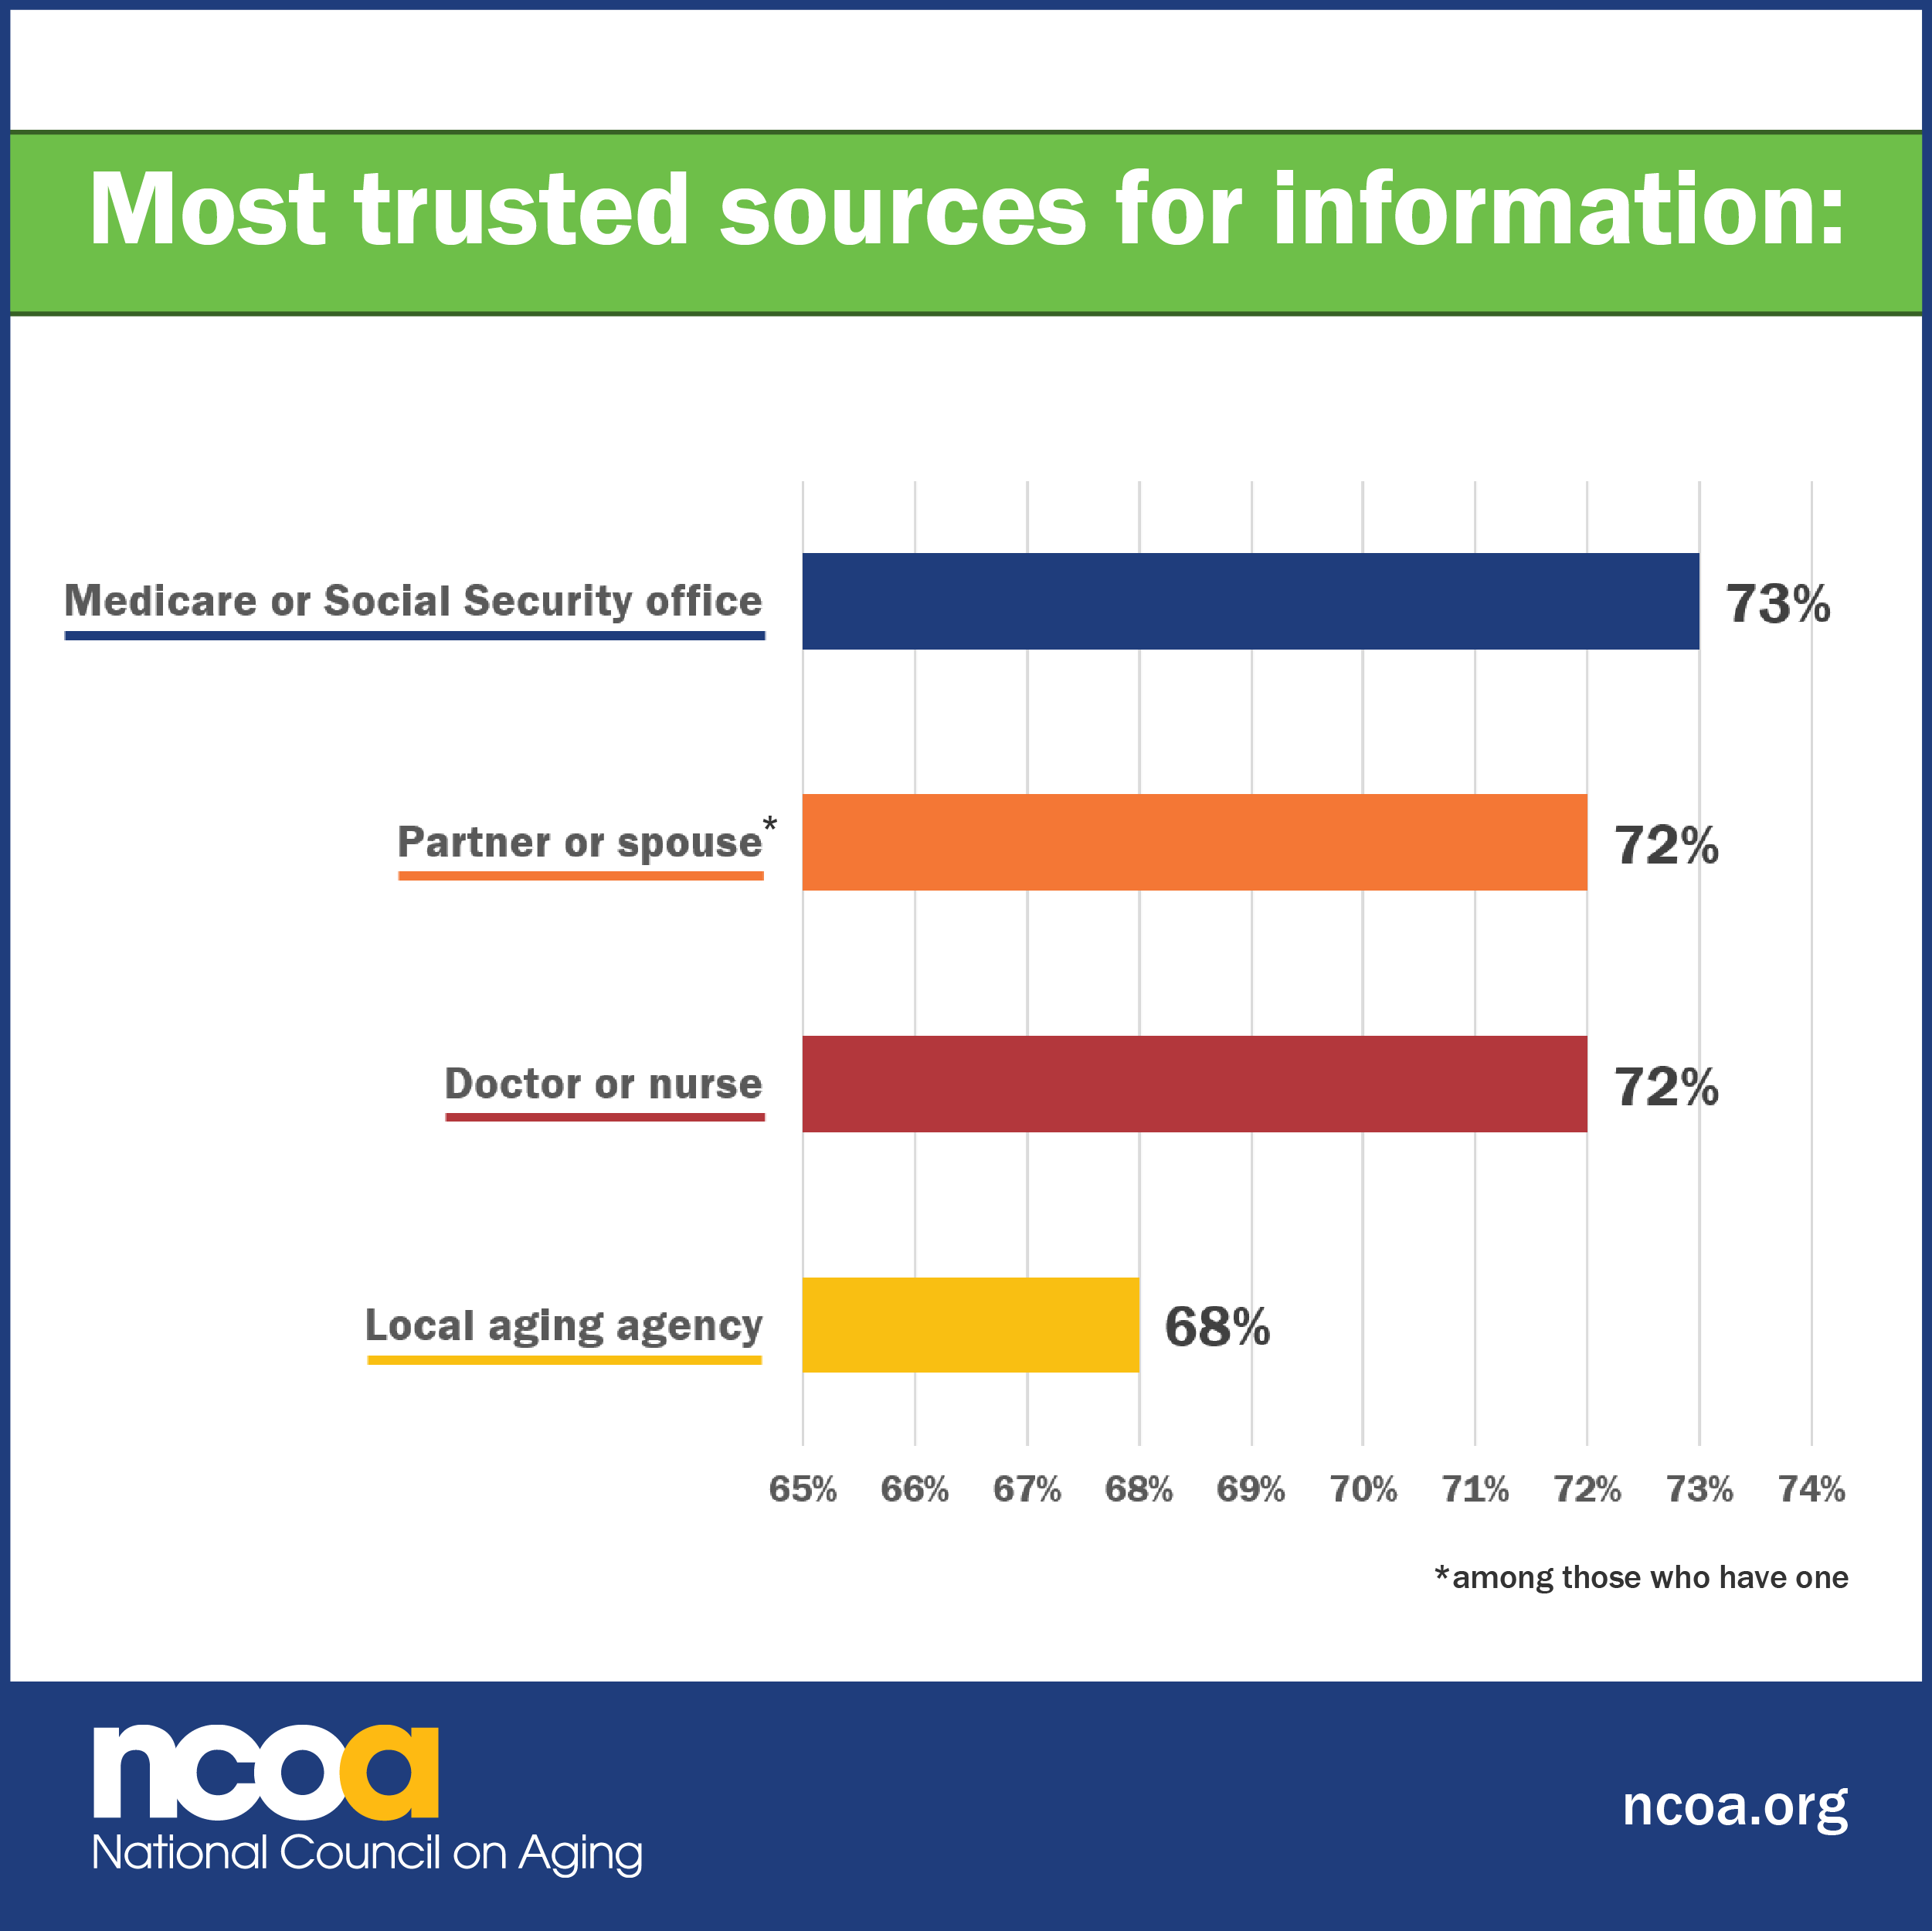 Illustration showing that older adults trust Medicare, Social Security, their partner/spouse, and medical providers most for trusted information